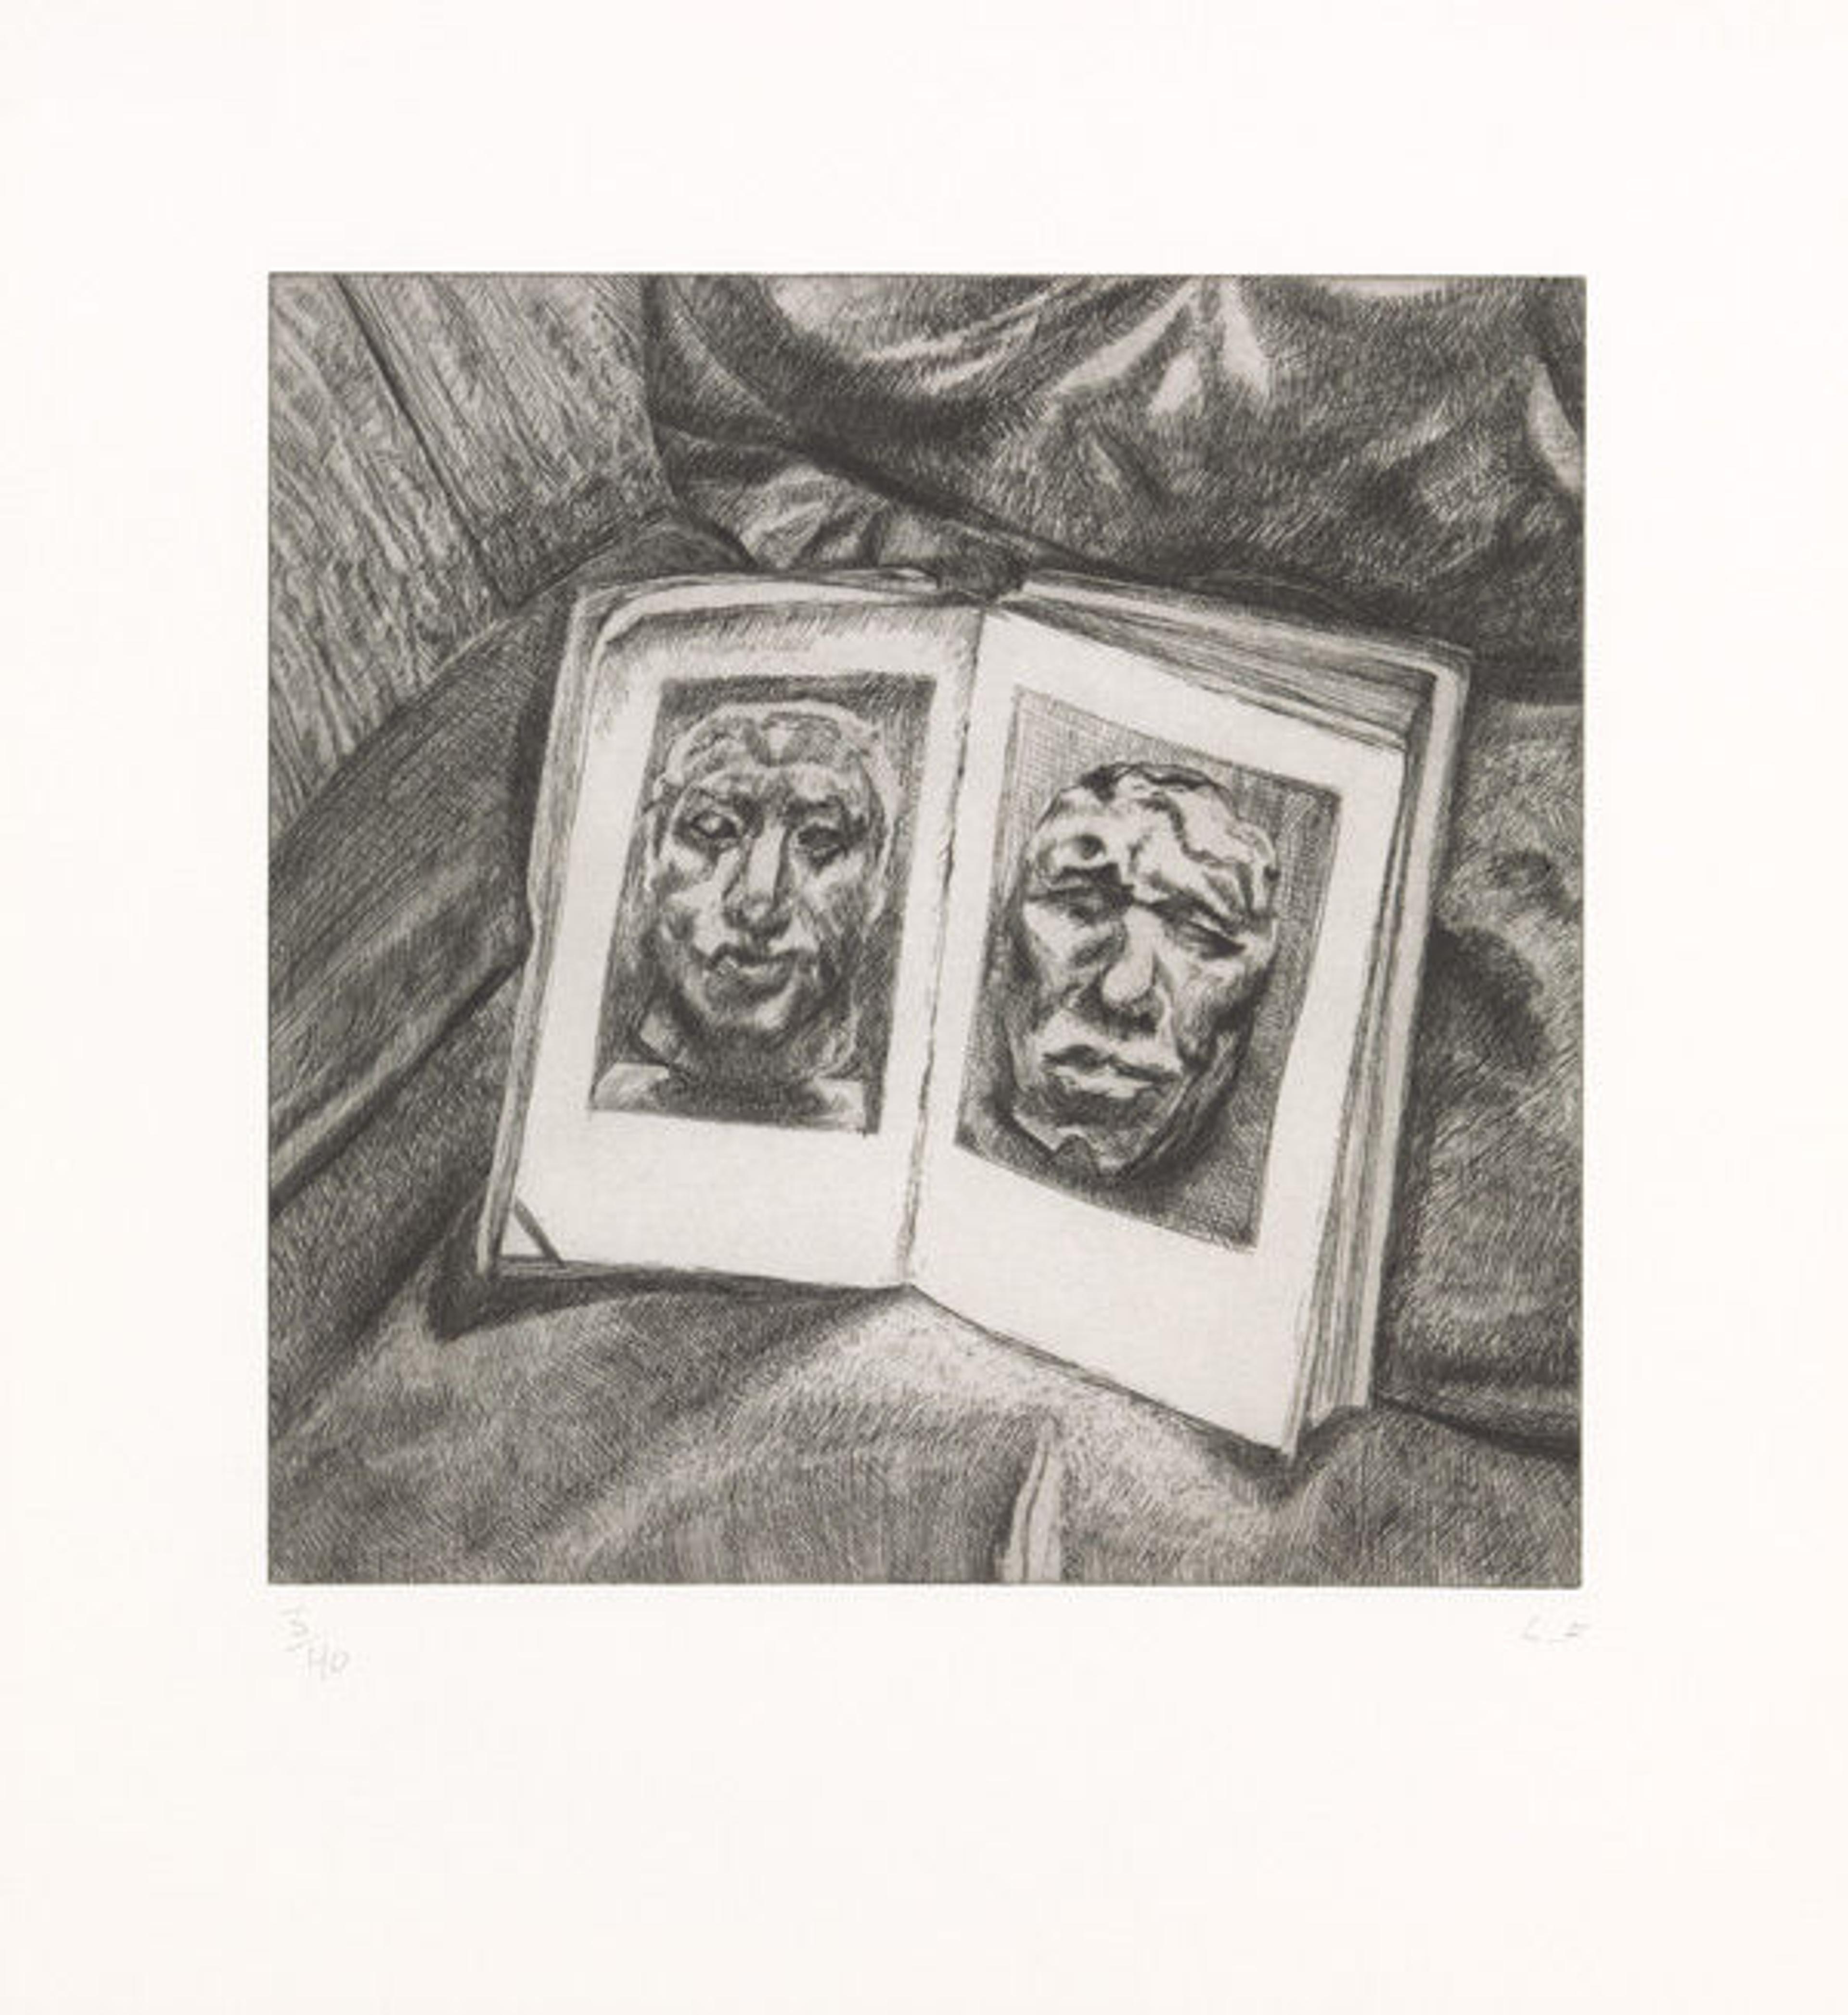 Lucian Freud, (British [born Germany], 1922–2011). The Egyptian Book, 1994. Etching; plate: 11 3/4 x 11 3/4 in. (29.8 x 29.8 cm), sheet: 16 3/4 x 18 1/2 in. (42.5 x 47 cm). The Metropolitan Museum of Art, New York, Reba and Dave Williams Gift, 1995 (1995.146)